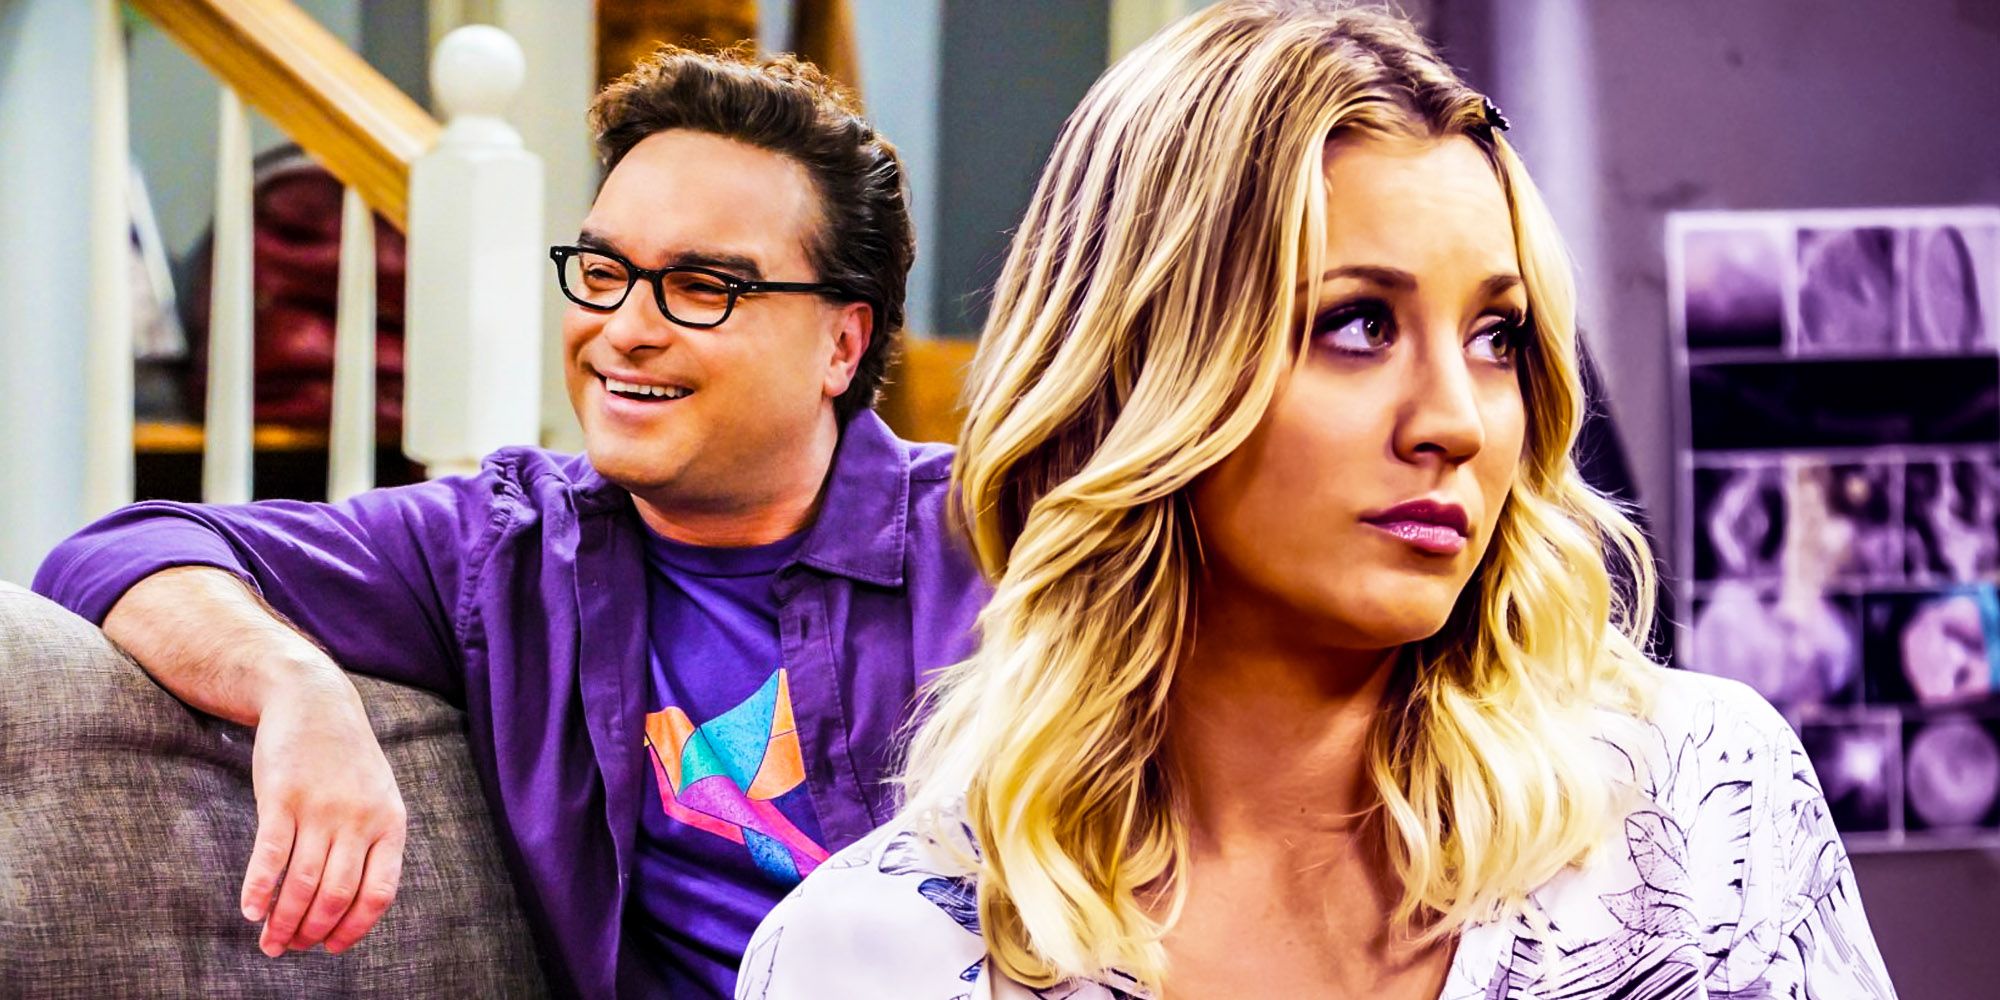 A collage of Leonard and Penny from Big Bang Theory